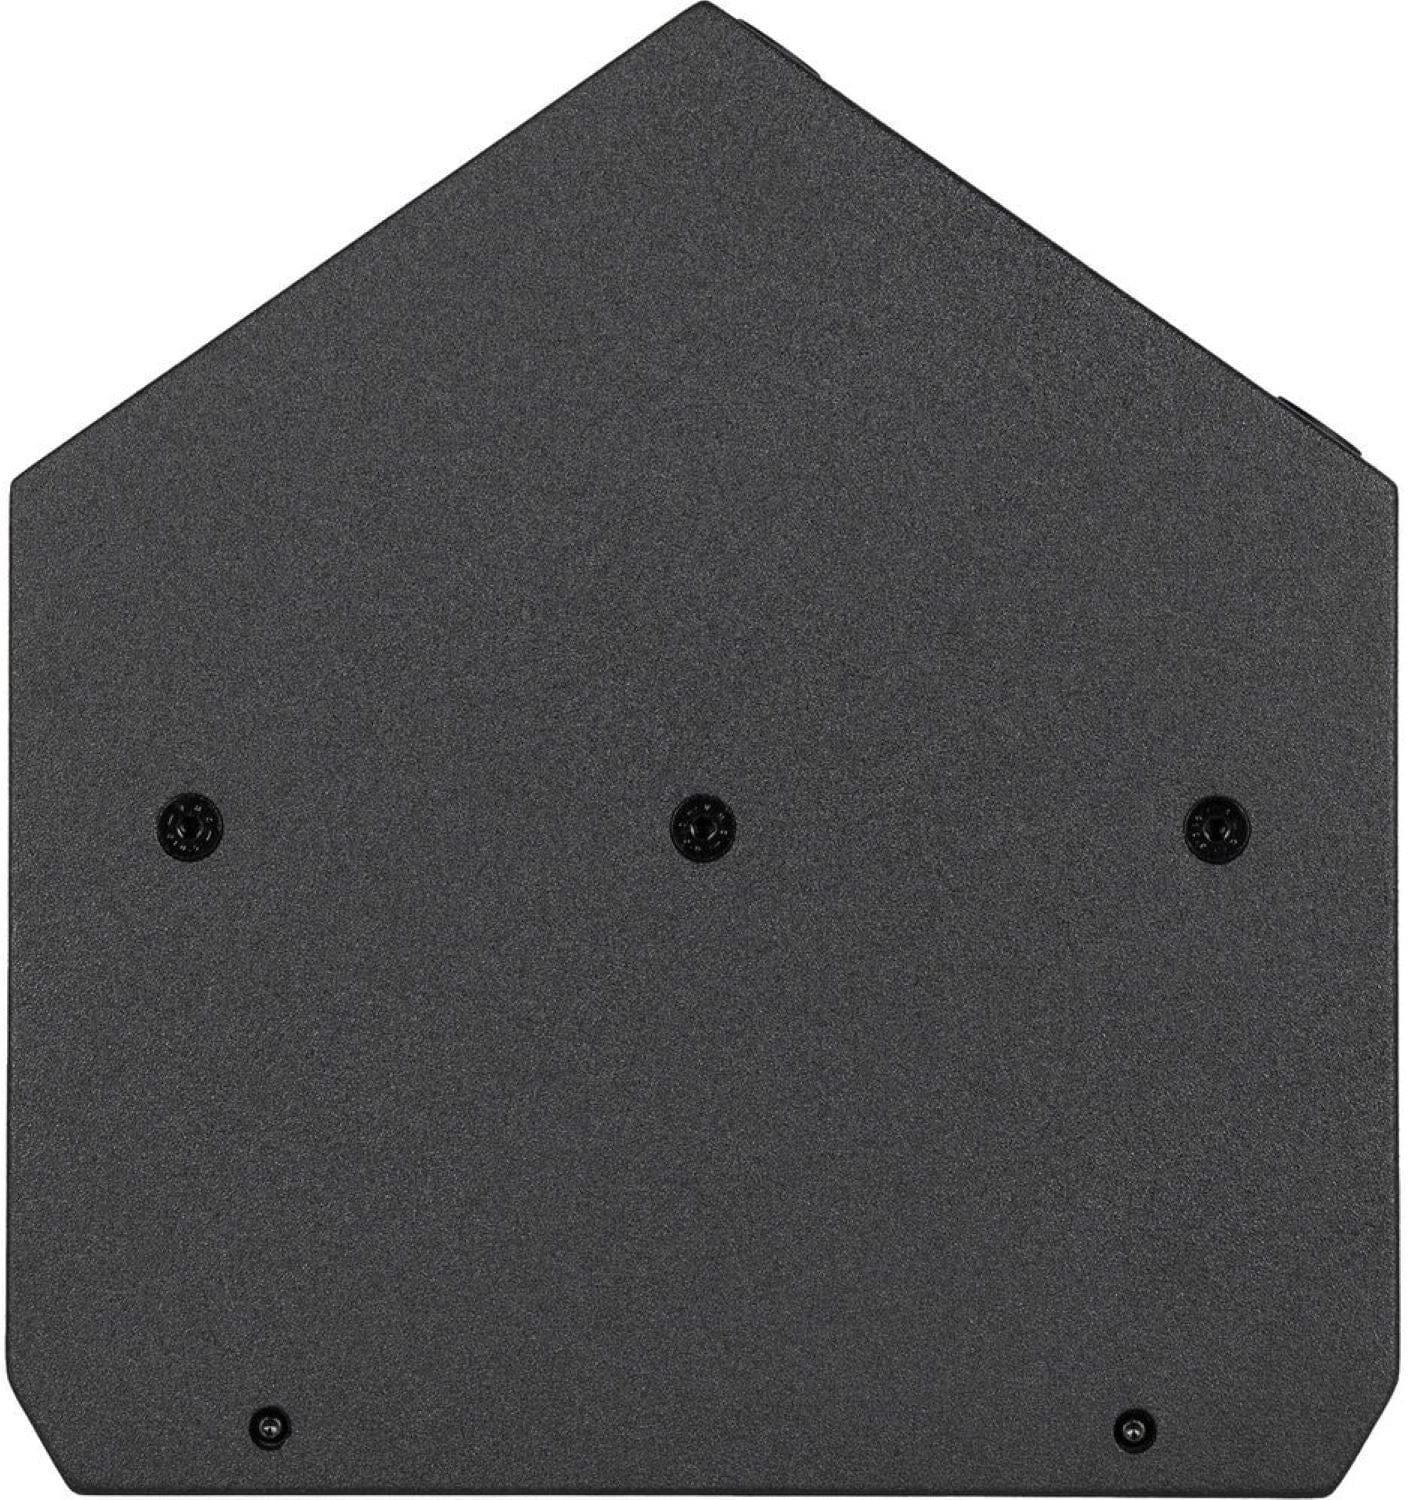 RCF NX945A 15-Inch Professional Active Speaker - PSSL ProSound and Stage Lighting